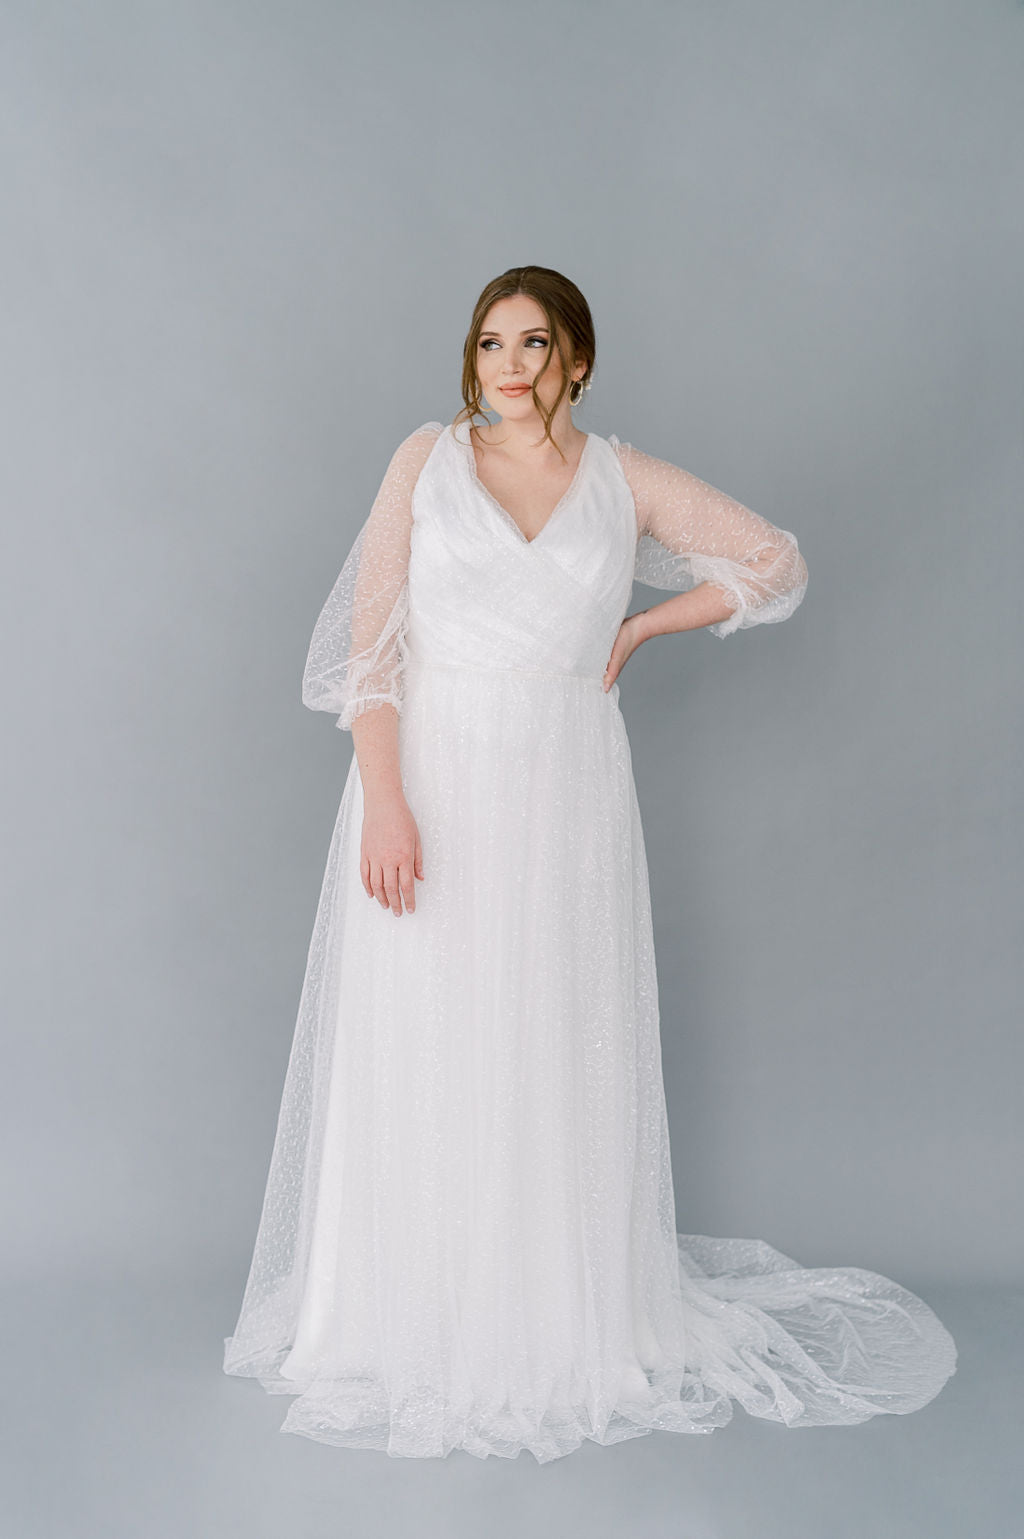 Romantic sparkly tulle wedding dress by Catherine Langlois. 3/4 poet sleeves, full gathered skirt, V neckline front and back. Timeless and glamourous.